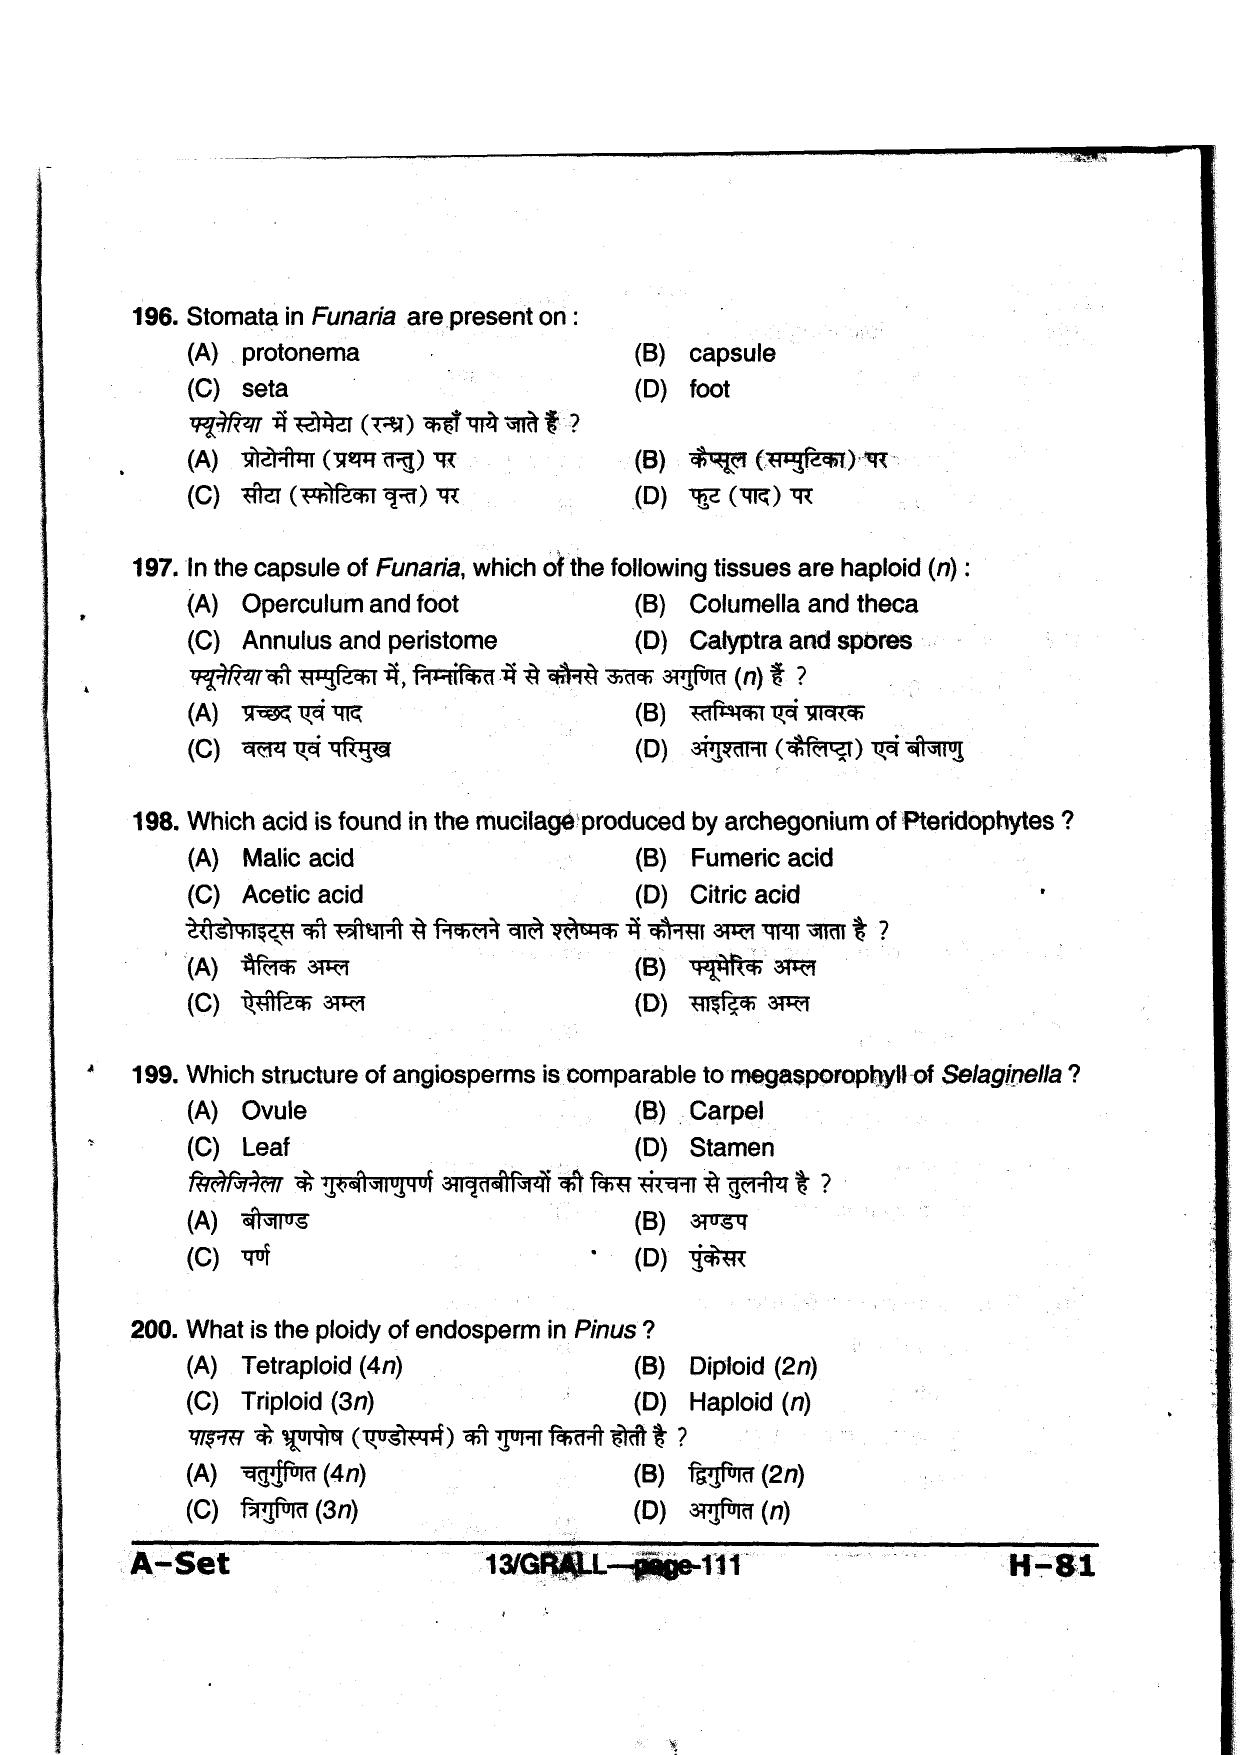 MP PAT 2013 Question Paper - Paper I - Page 111